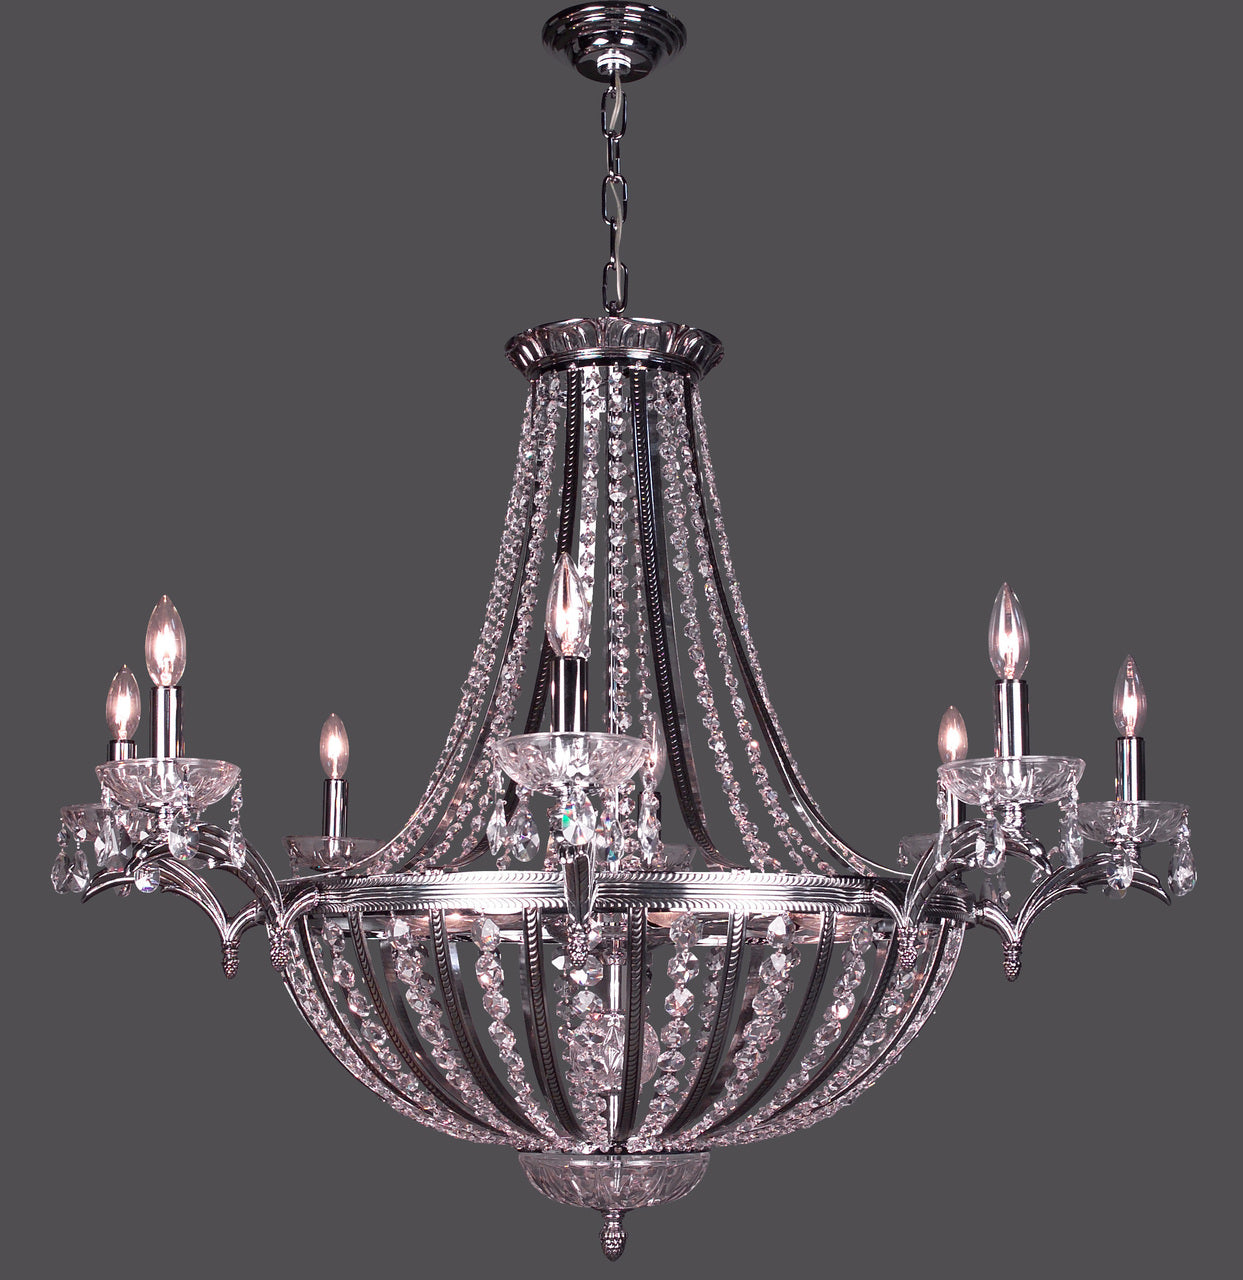 Classic Lighting 1928 CHB S Terragona Crystal Chandelier in Chrome/Black Patina (Imported from Spain)